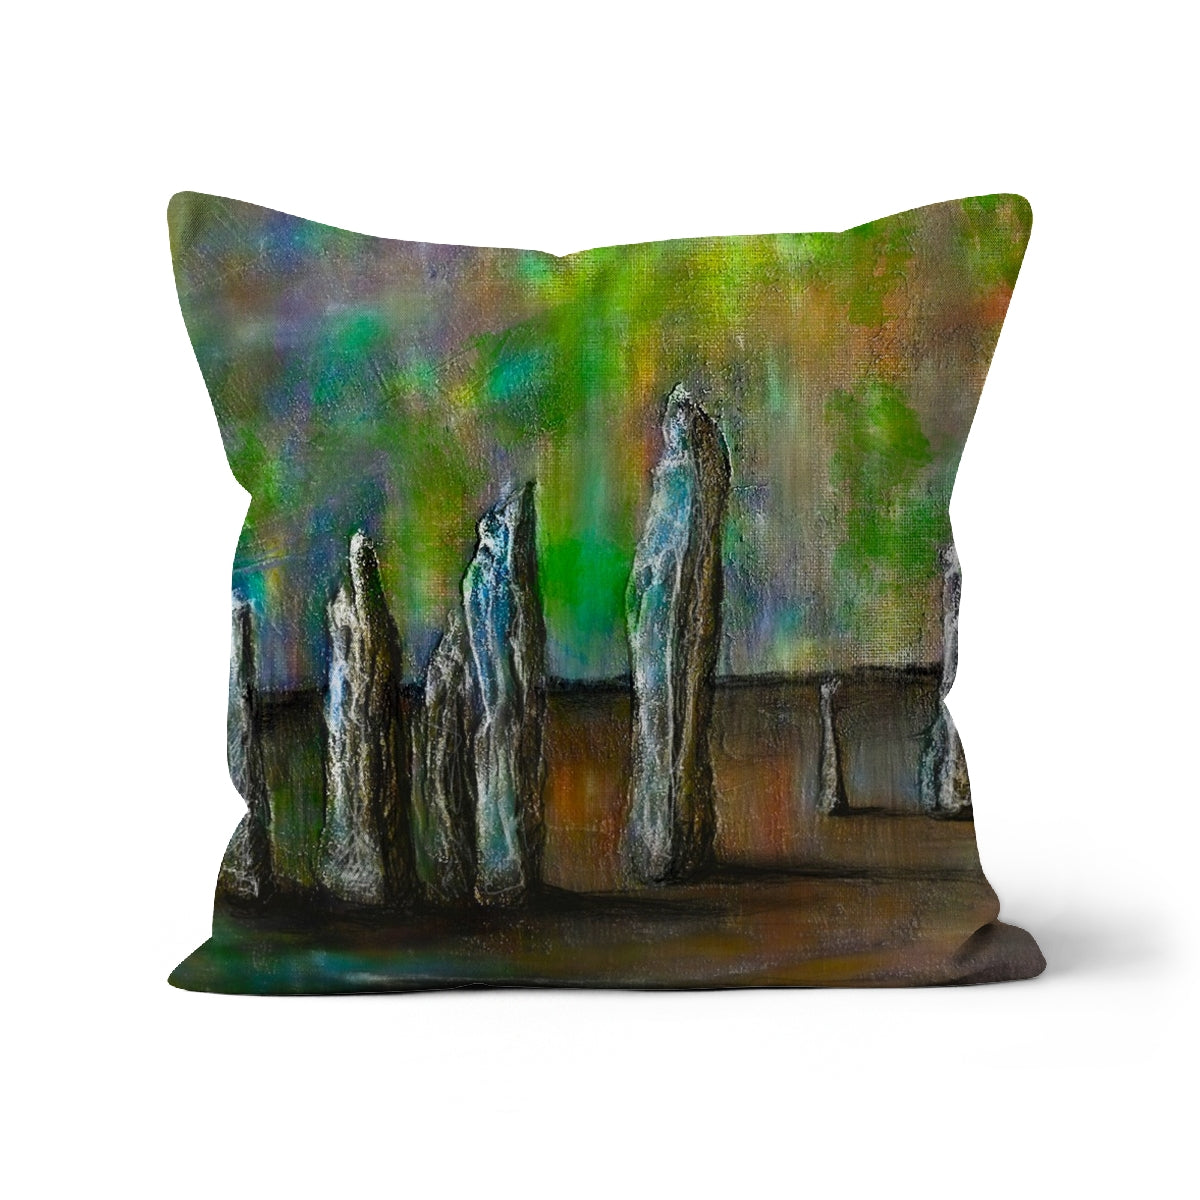 Callanish Northern Lights Art Gifts Cushion-Cushions-Hebridean Islands Art Gallery-Faux Suede-12"x12"-Paintings, Prints, Homeware, Art Gifts From Scotland By Scottish Artist Kevin Hunter